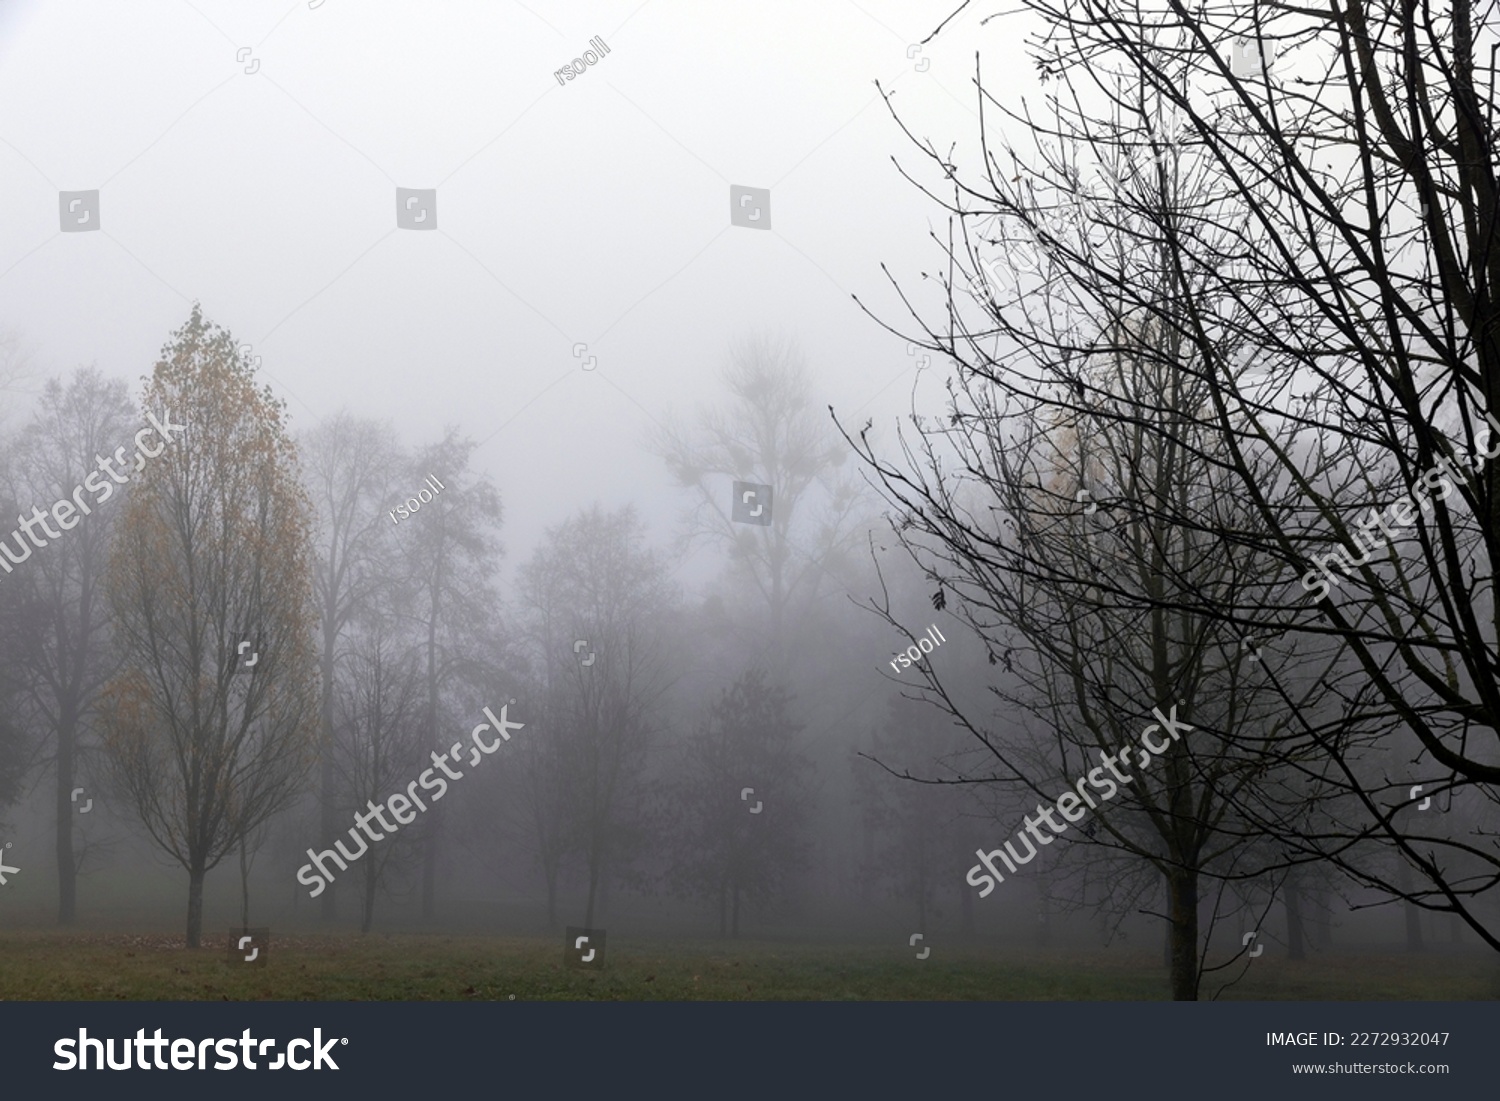 Bare deciduous trees in autumn cold weather, cloudy weather in late autumn #2272932047